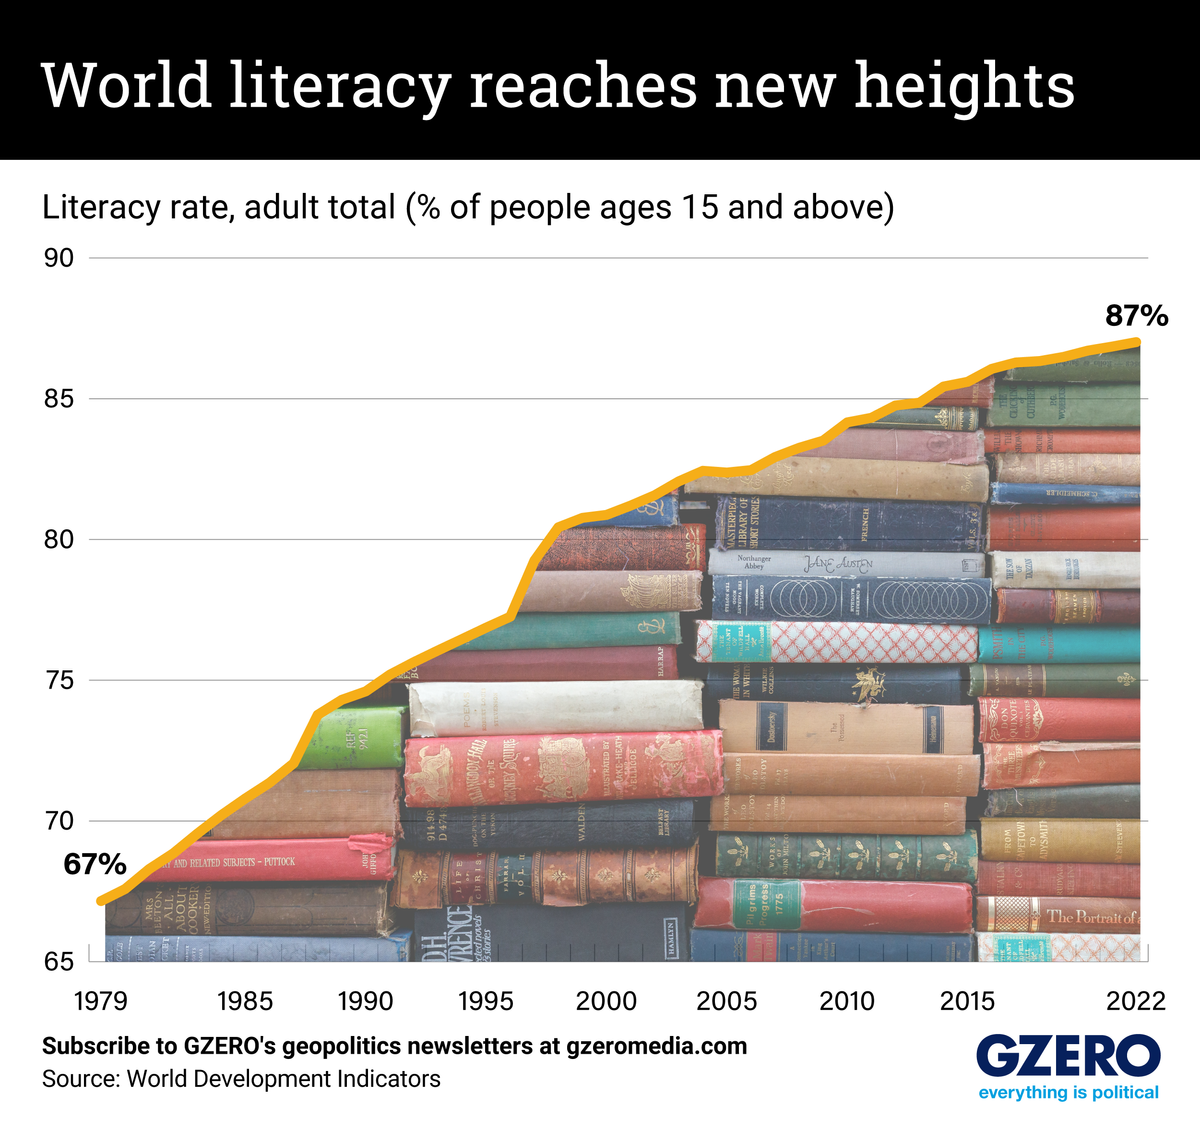 Graphic Truth: World literacy reaches new heights